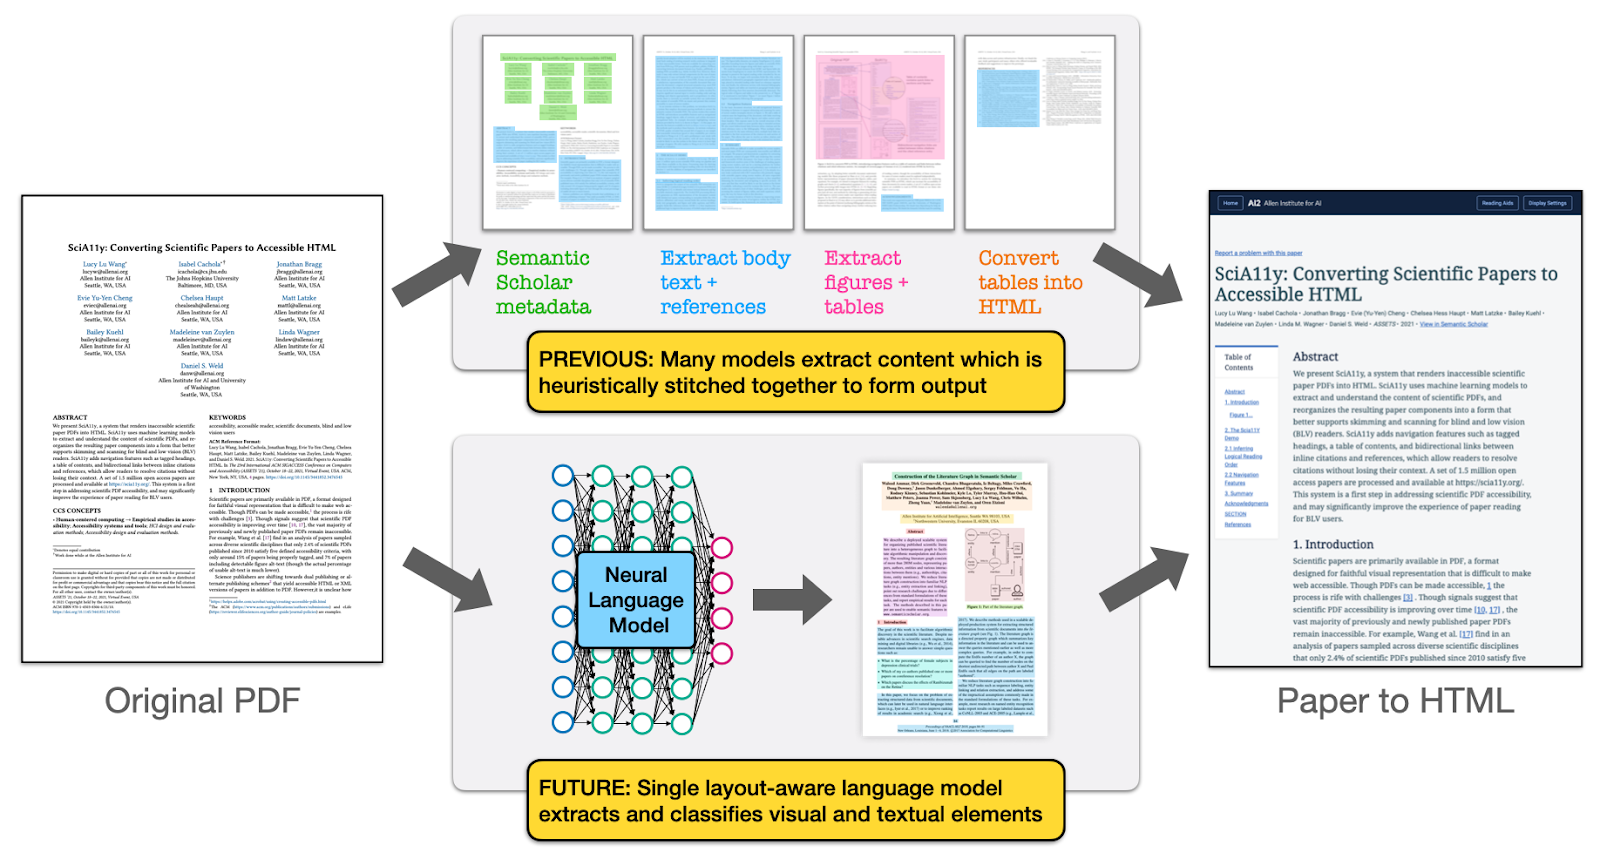 This schematic shows the previous and future modeling pipeline planned for the Paper to HTML system. On the far left is a screenshot of page 1 of a paper PDF, labeled "Original PDF", and on the far right is a screenshot of the same paper in Paper to HTML, rendered as an HTML document. The top region has a box containing screenshots of 4 pages in the PDF, with various metadata, text, and figure regions highlighted by color. There are four steps labeled "Semantic Scholar metadata," "Extract body text + references," "Extract figures + tables," and "Convert tables into HTML." A text box labels this region, "PREVIOUS: Many models extract content which is heuristically stitched together to form output." The bottom region has a box containing a neural network diagram labeled "Neural Language Model" pointing to a screenshot of a PDF with different regions colored by the category of text. A text box labels this region, "FUTURE: Single layout-aware language model extracts and classifies visual and textual elements.